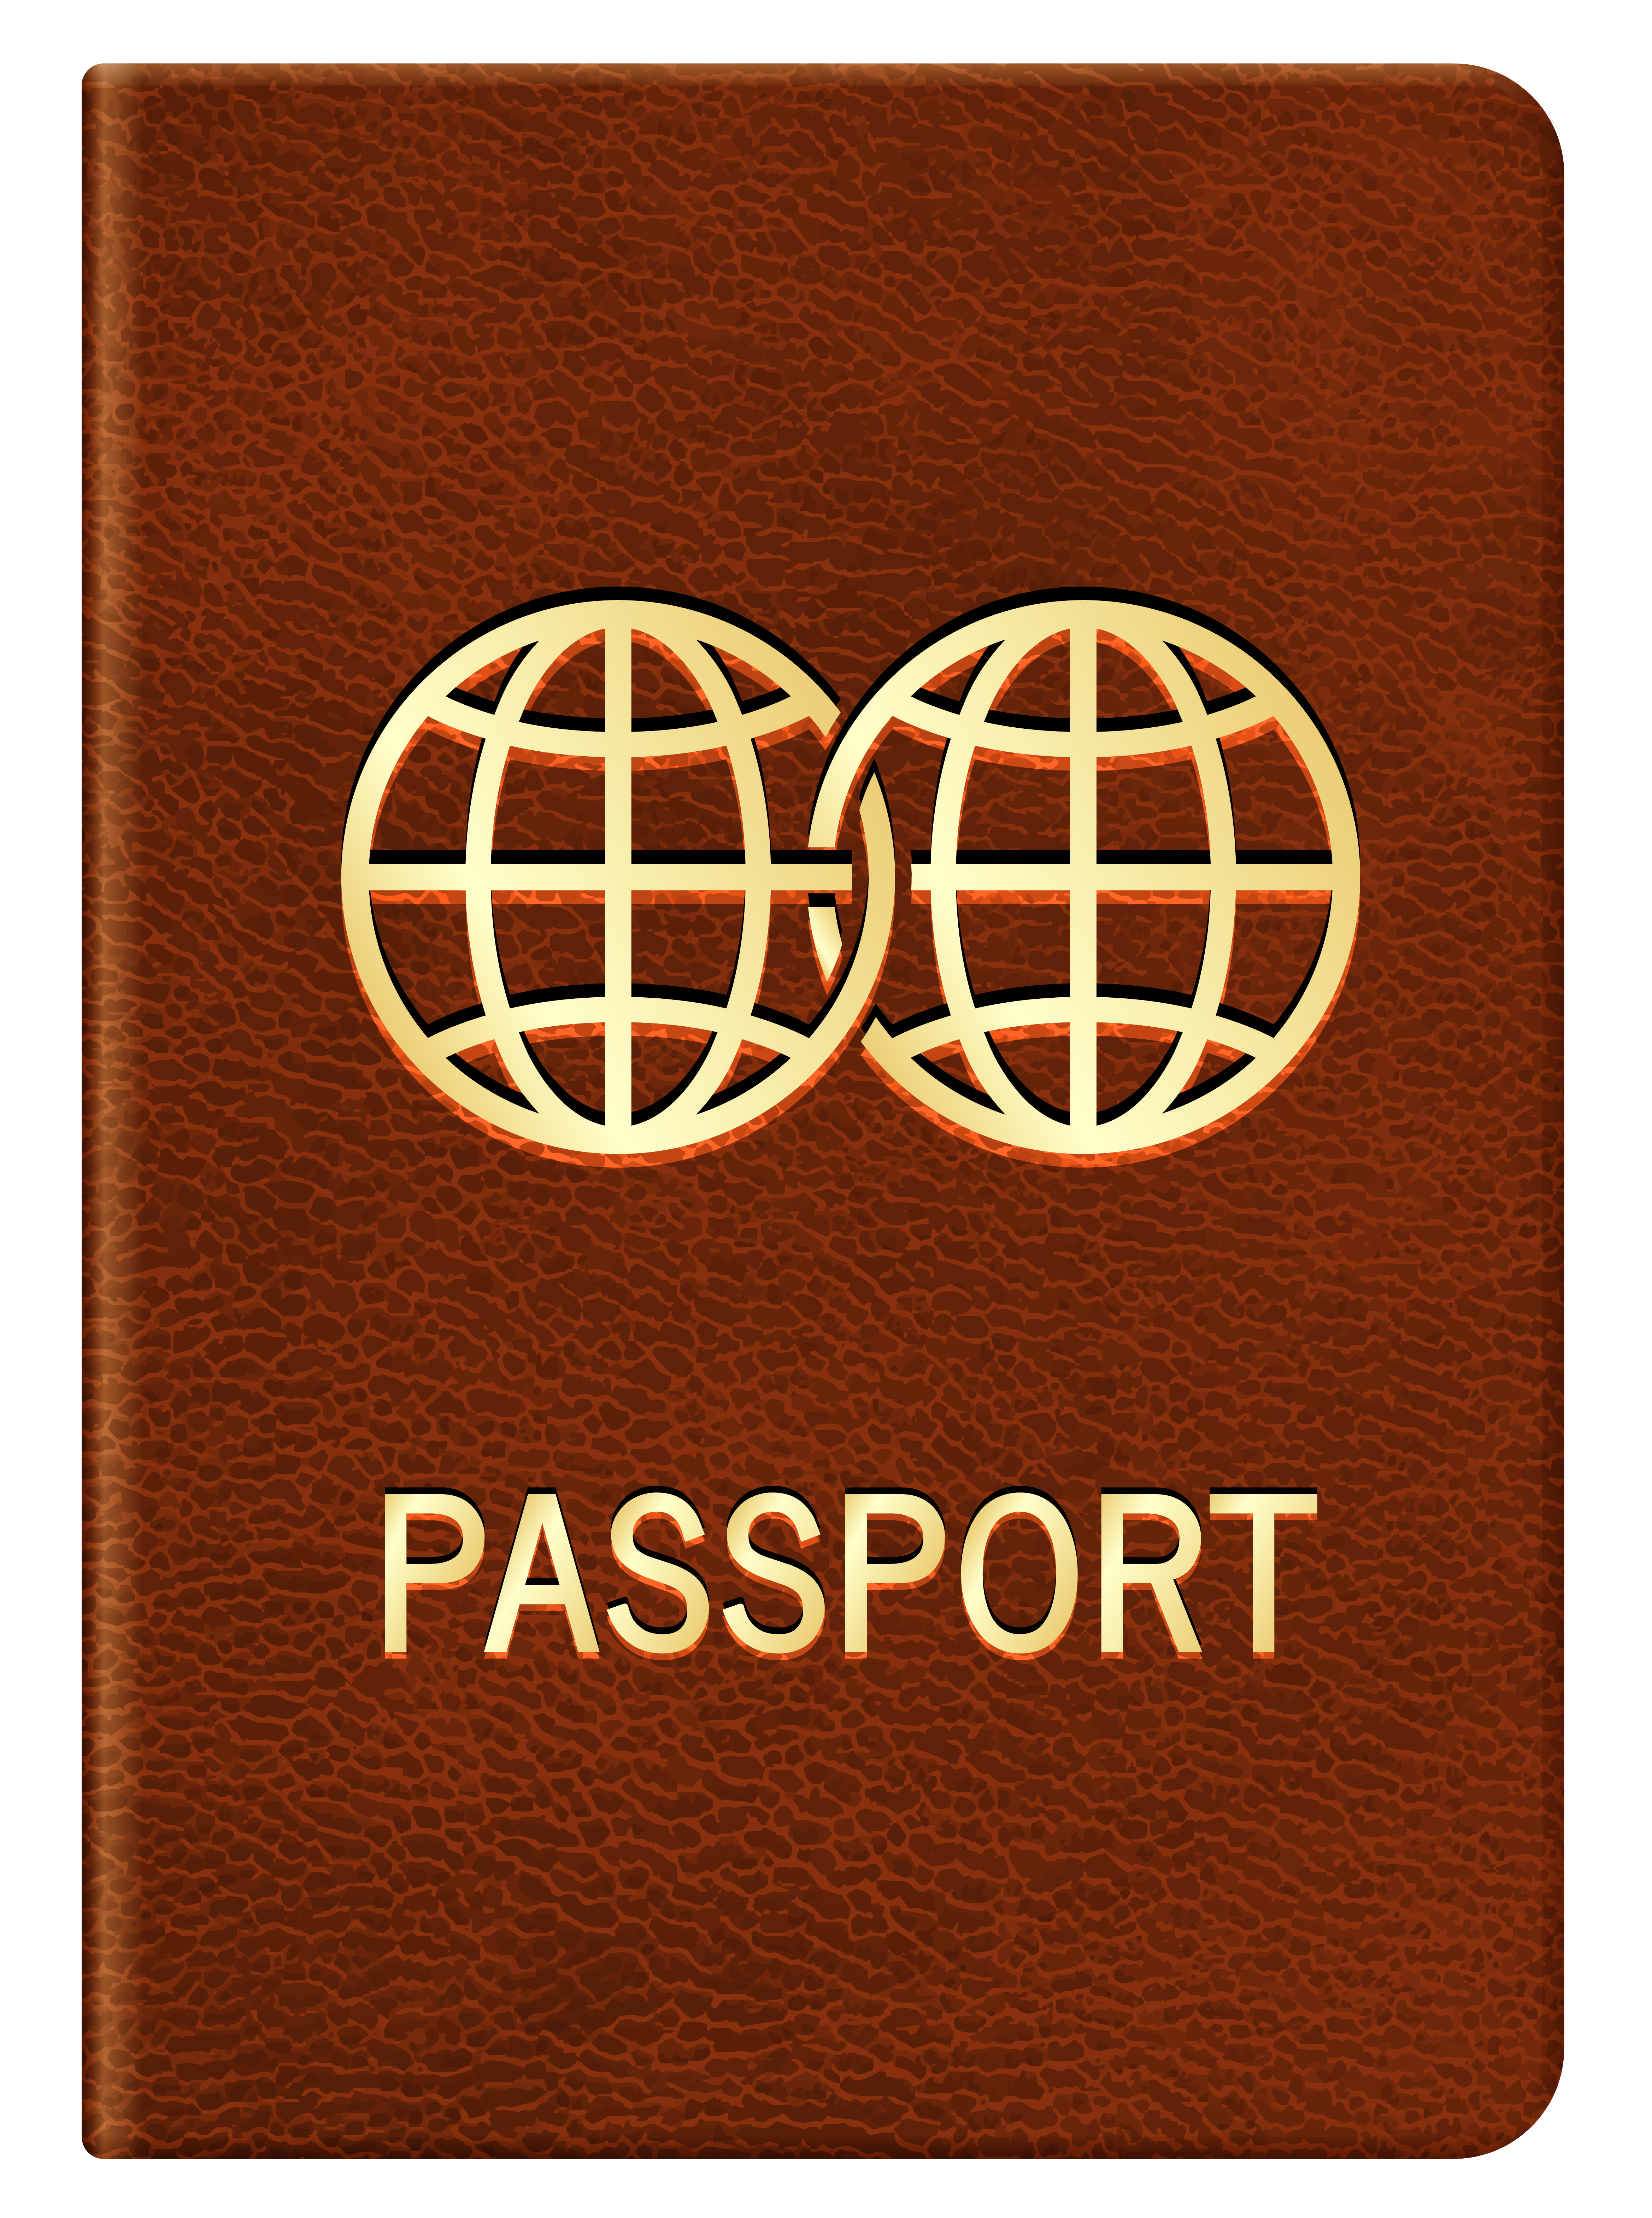 Passport PNG Clipart Image